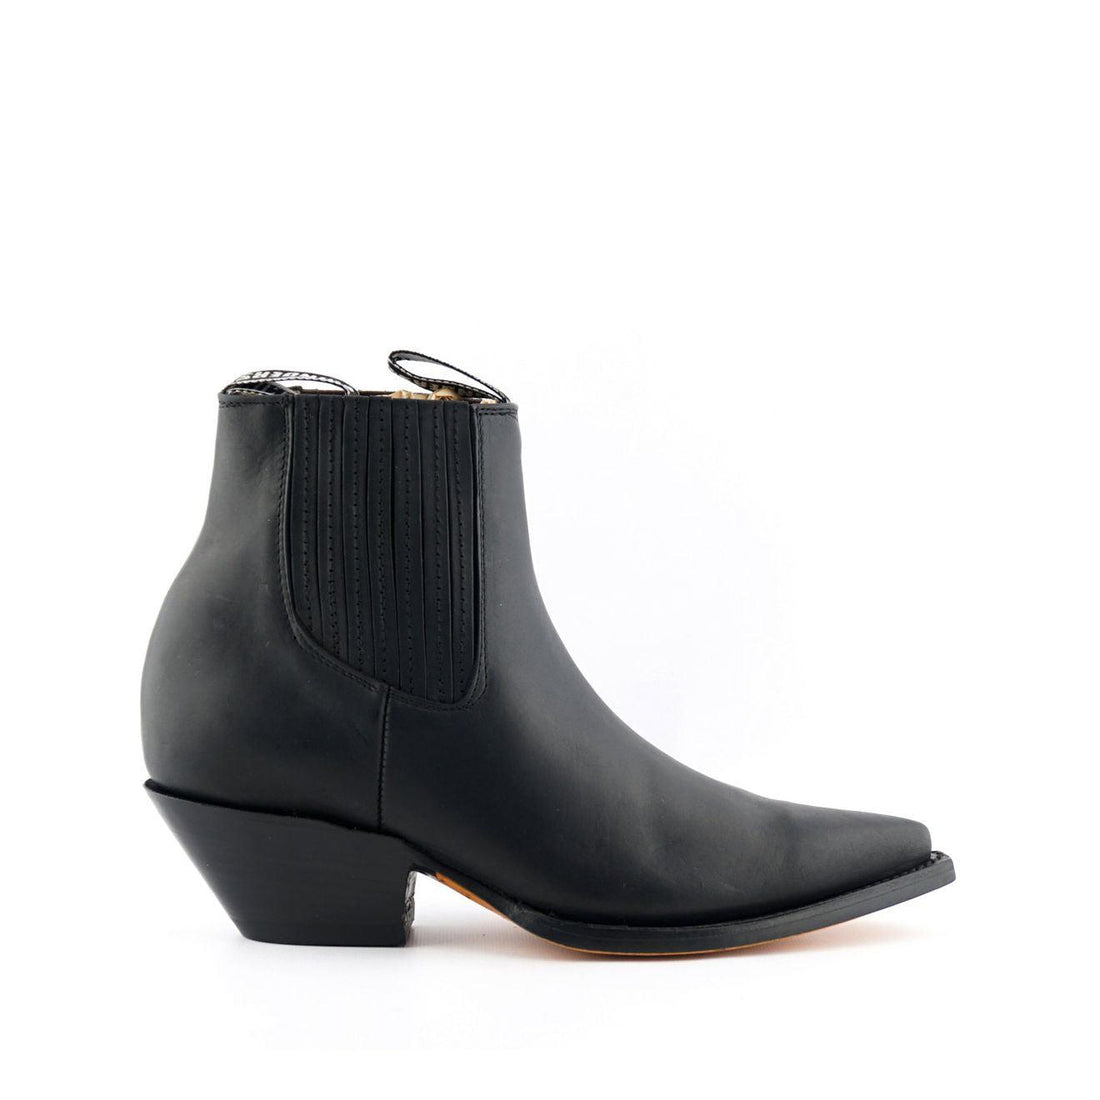 Grinders Unisex Black Western Chelsea Boots- Mustang - Upperclass Fashions 